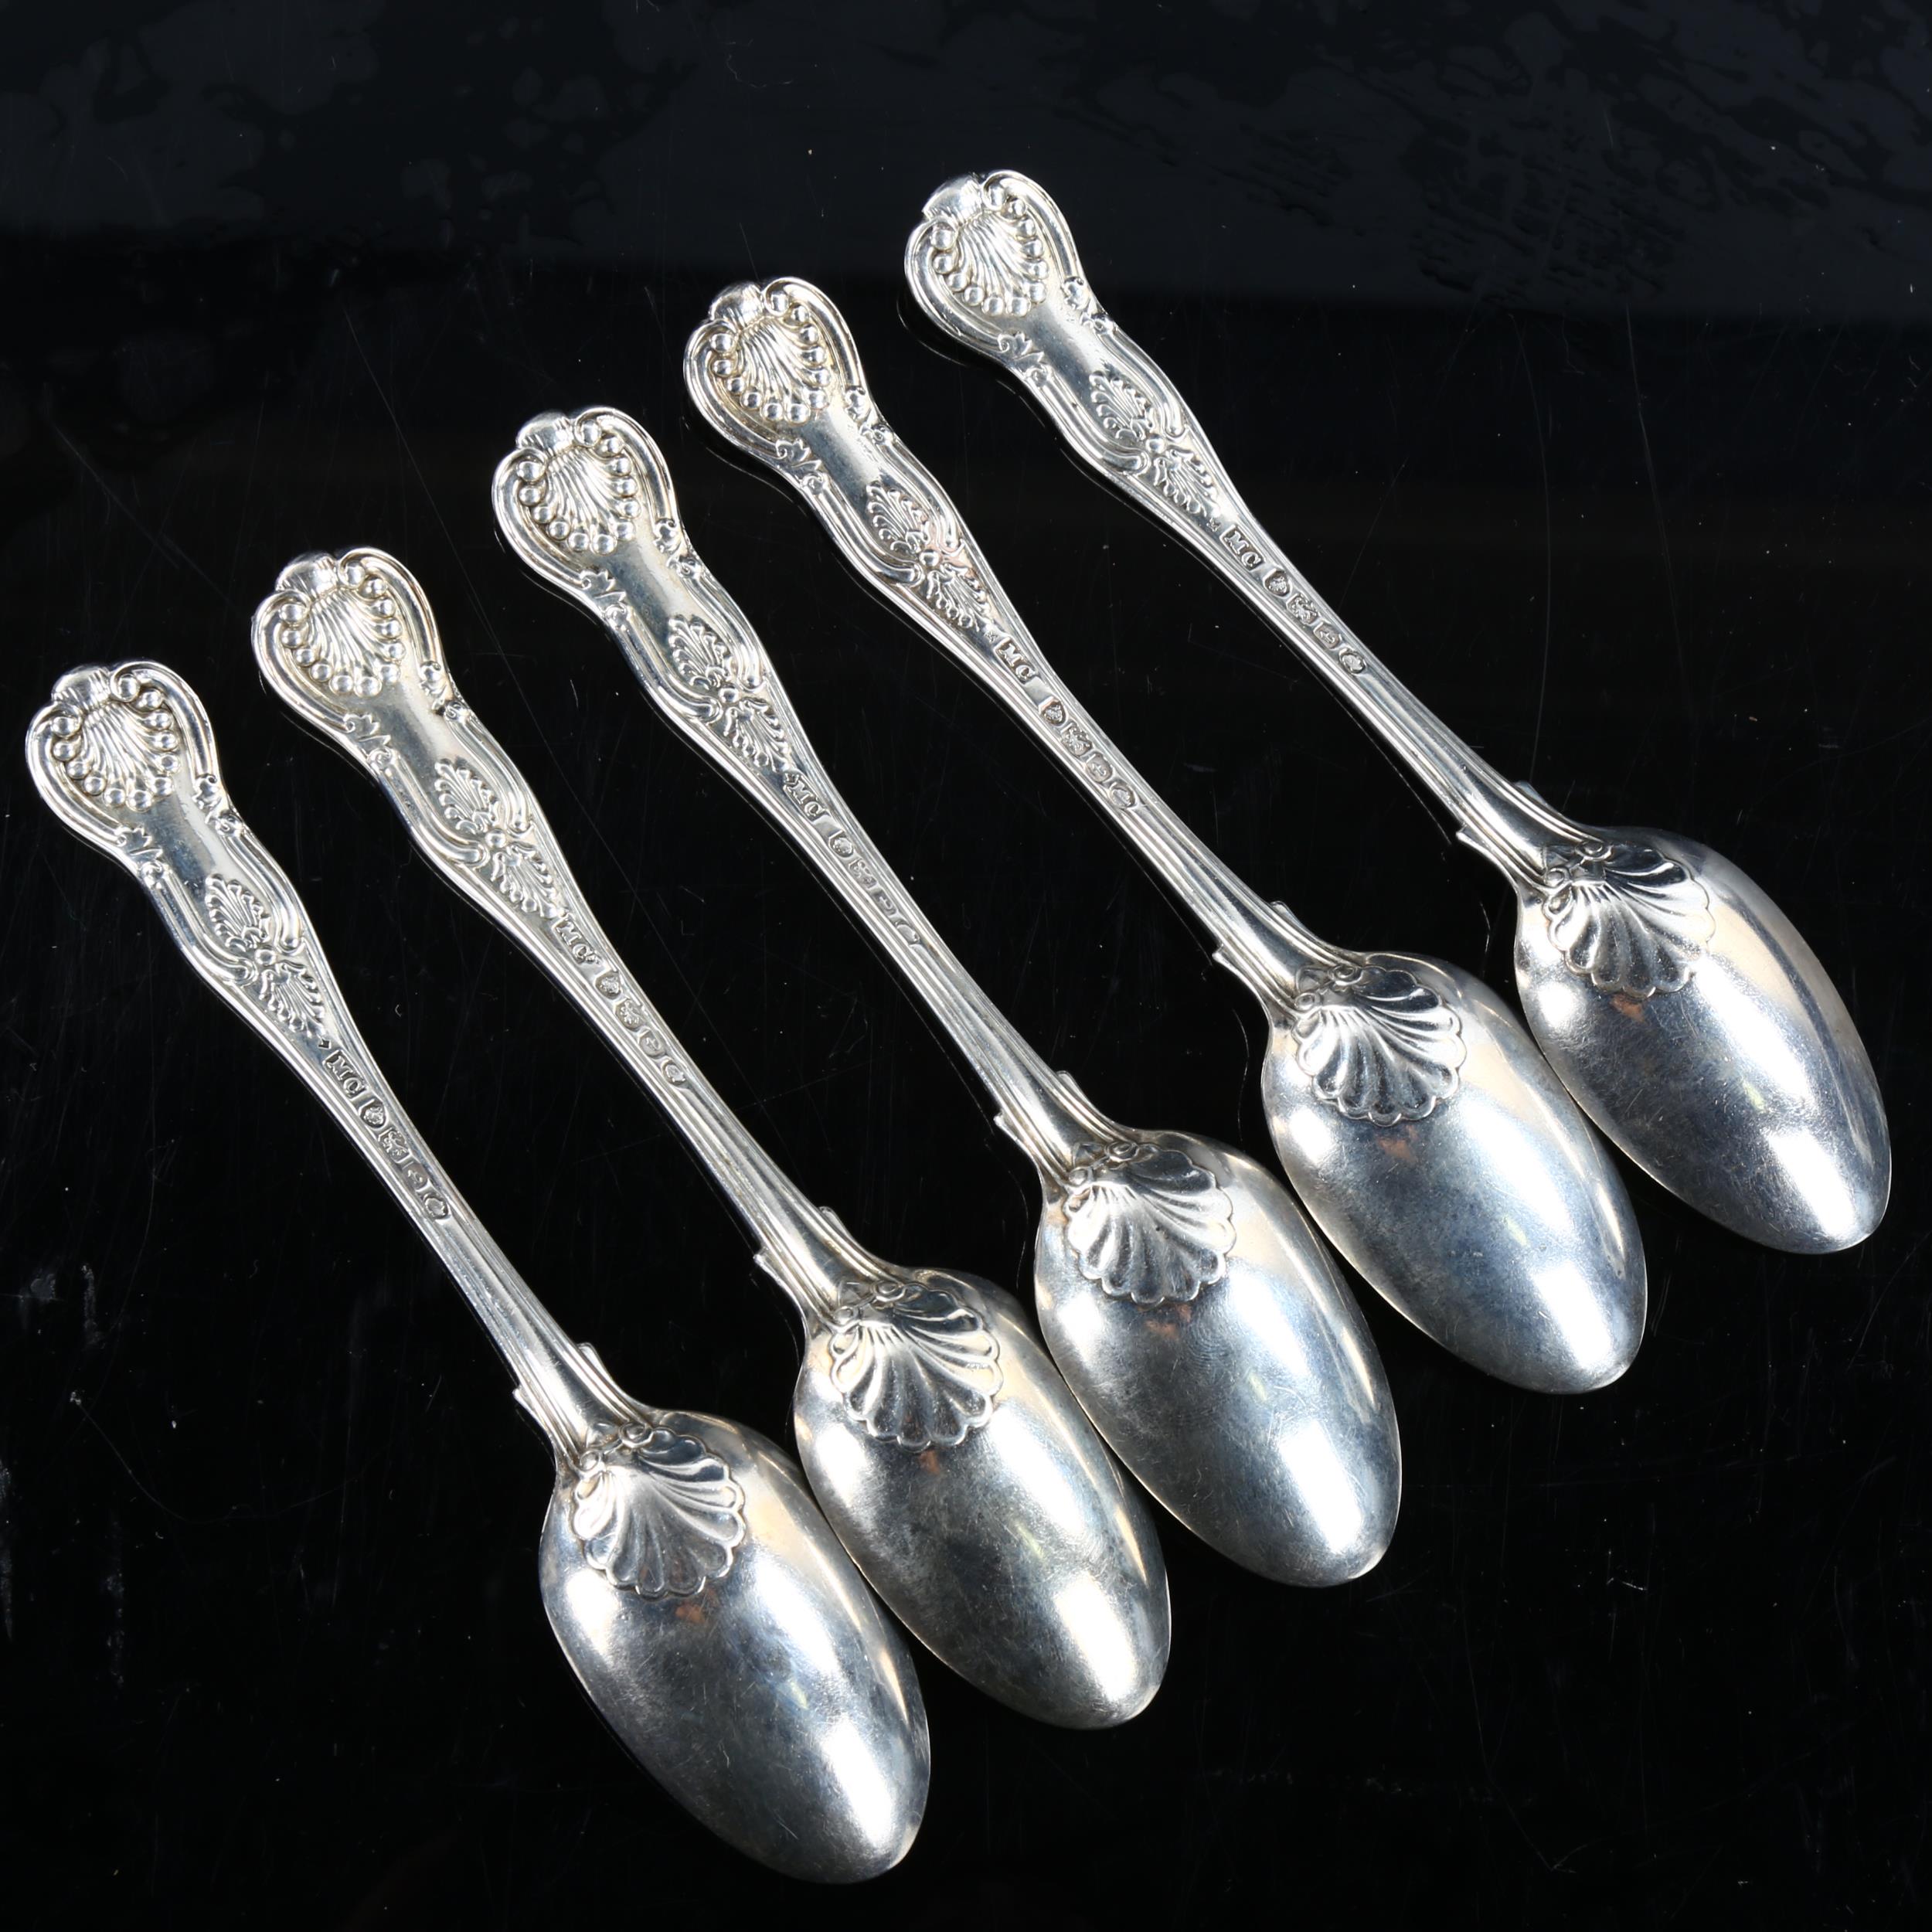 A set of 5 William IV silver King's pattern teaspoons, by Mary Chawner, hallmarks London 1834, - Image 3 of 3